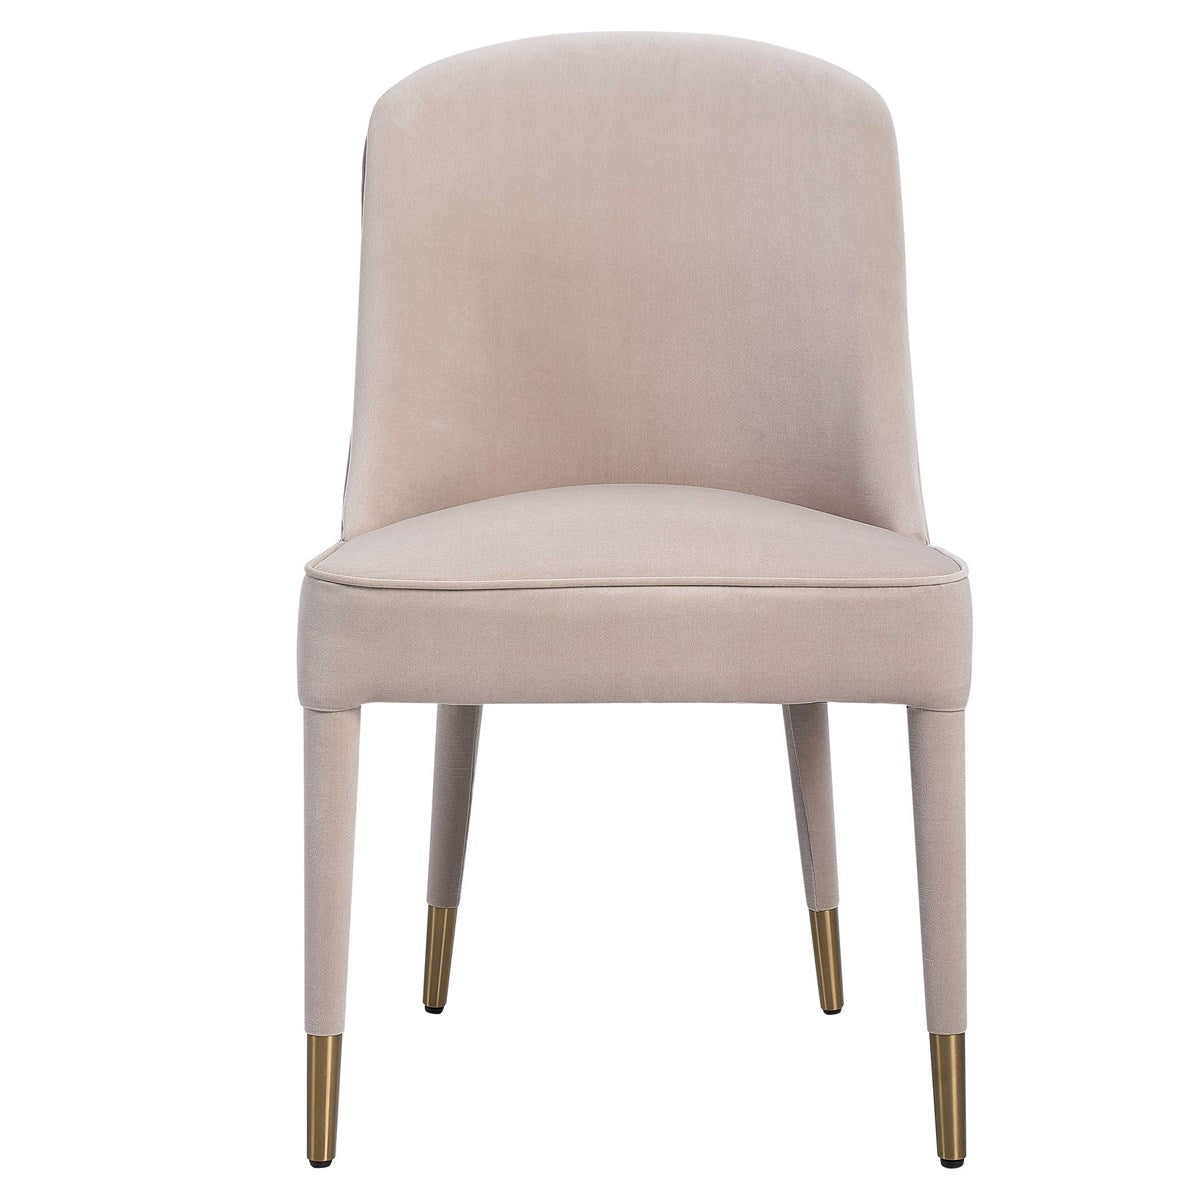 Brie Armless Modern Dining Chair - Set of 2